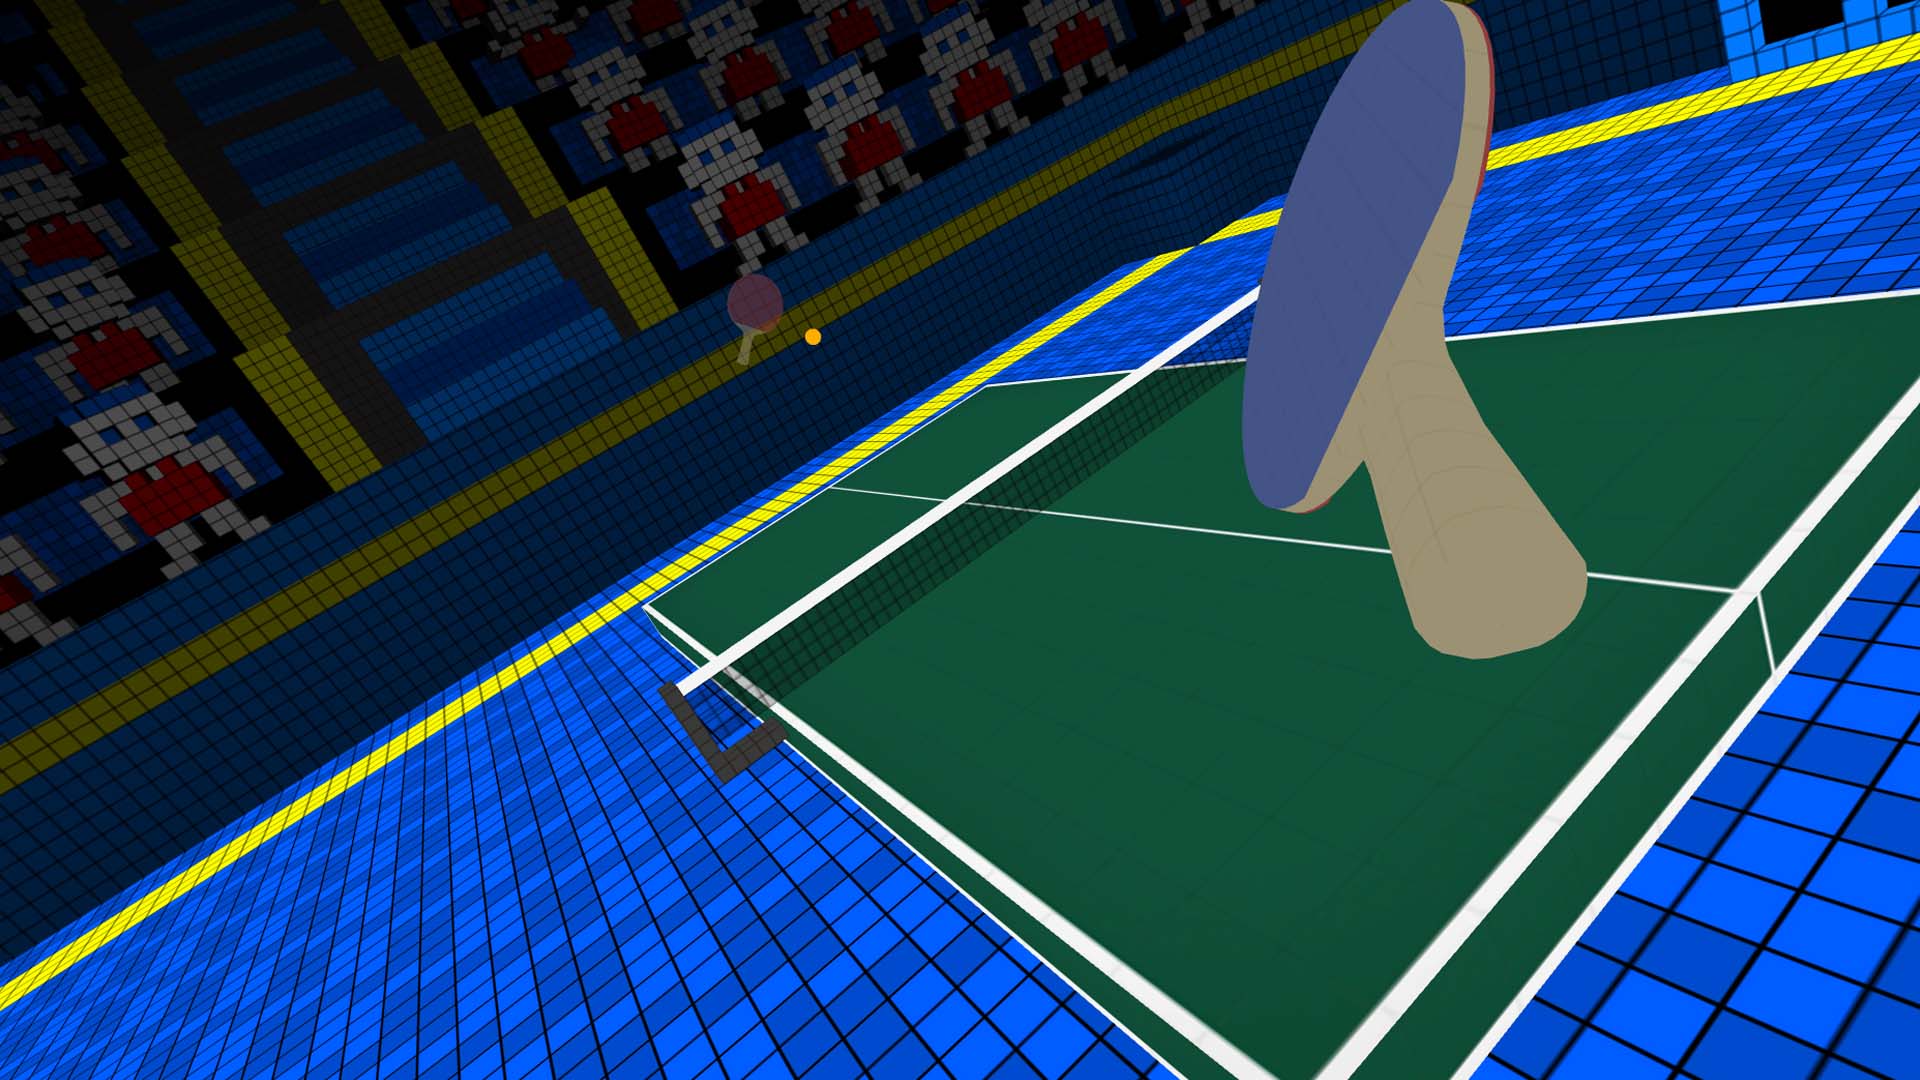 [PS VR Only] VR Ping Pong